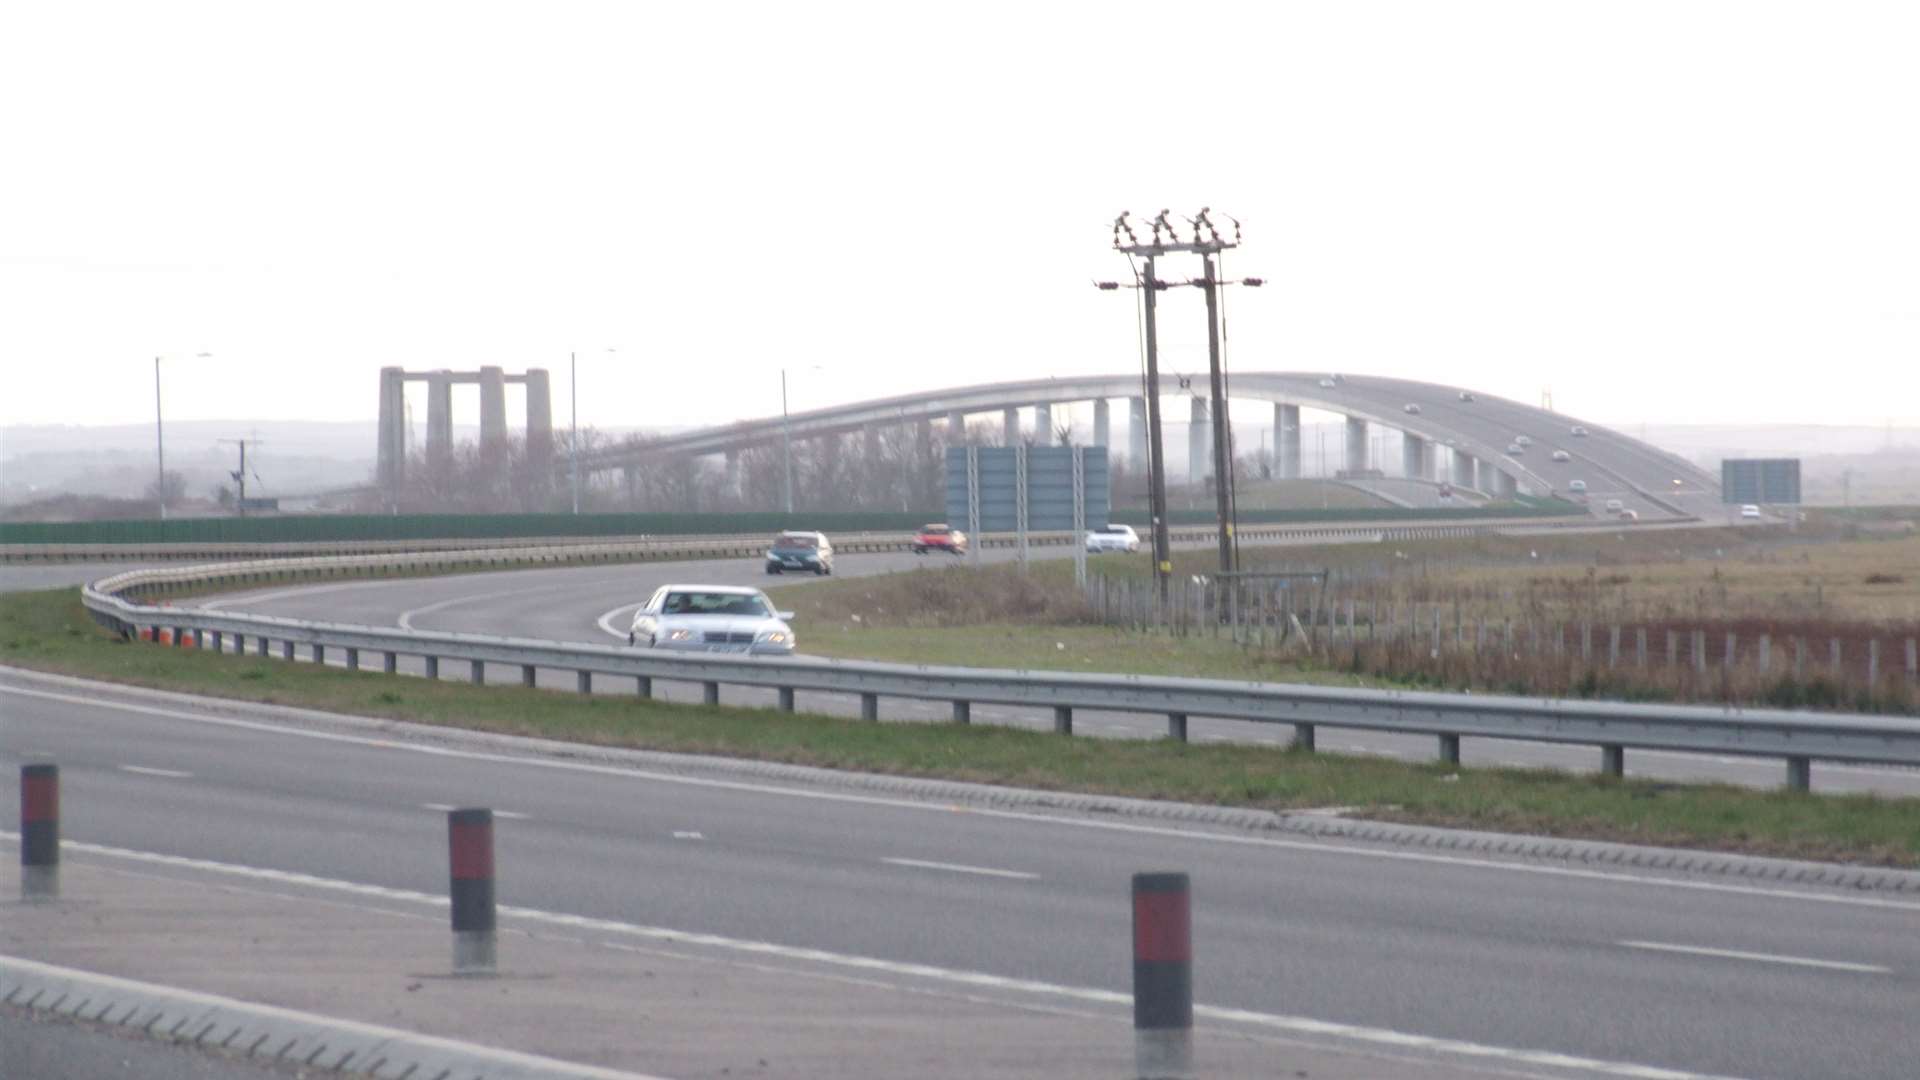 The Sheppey Crossing.